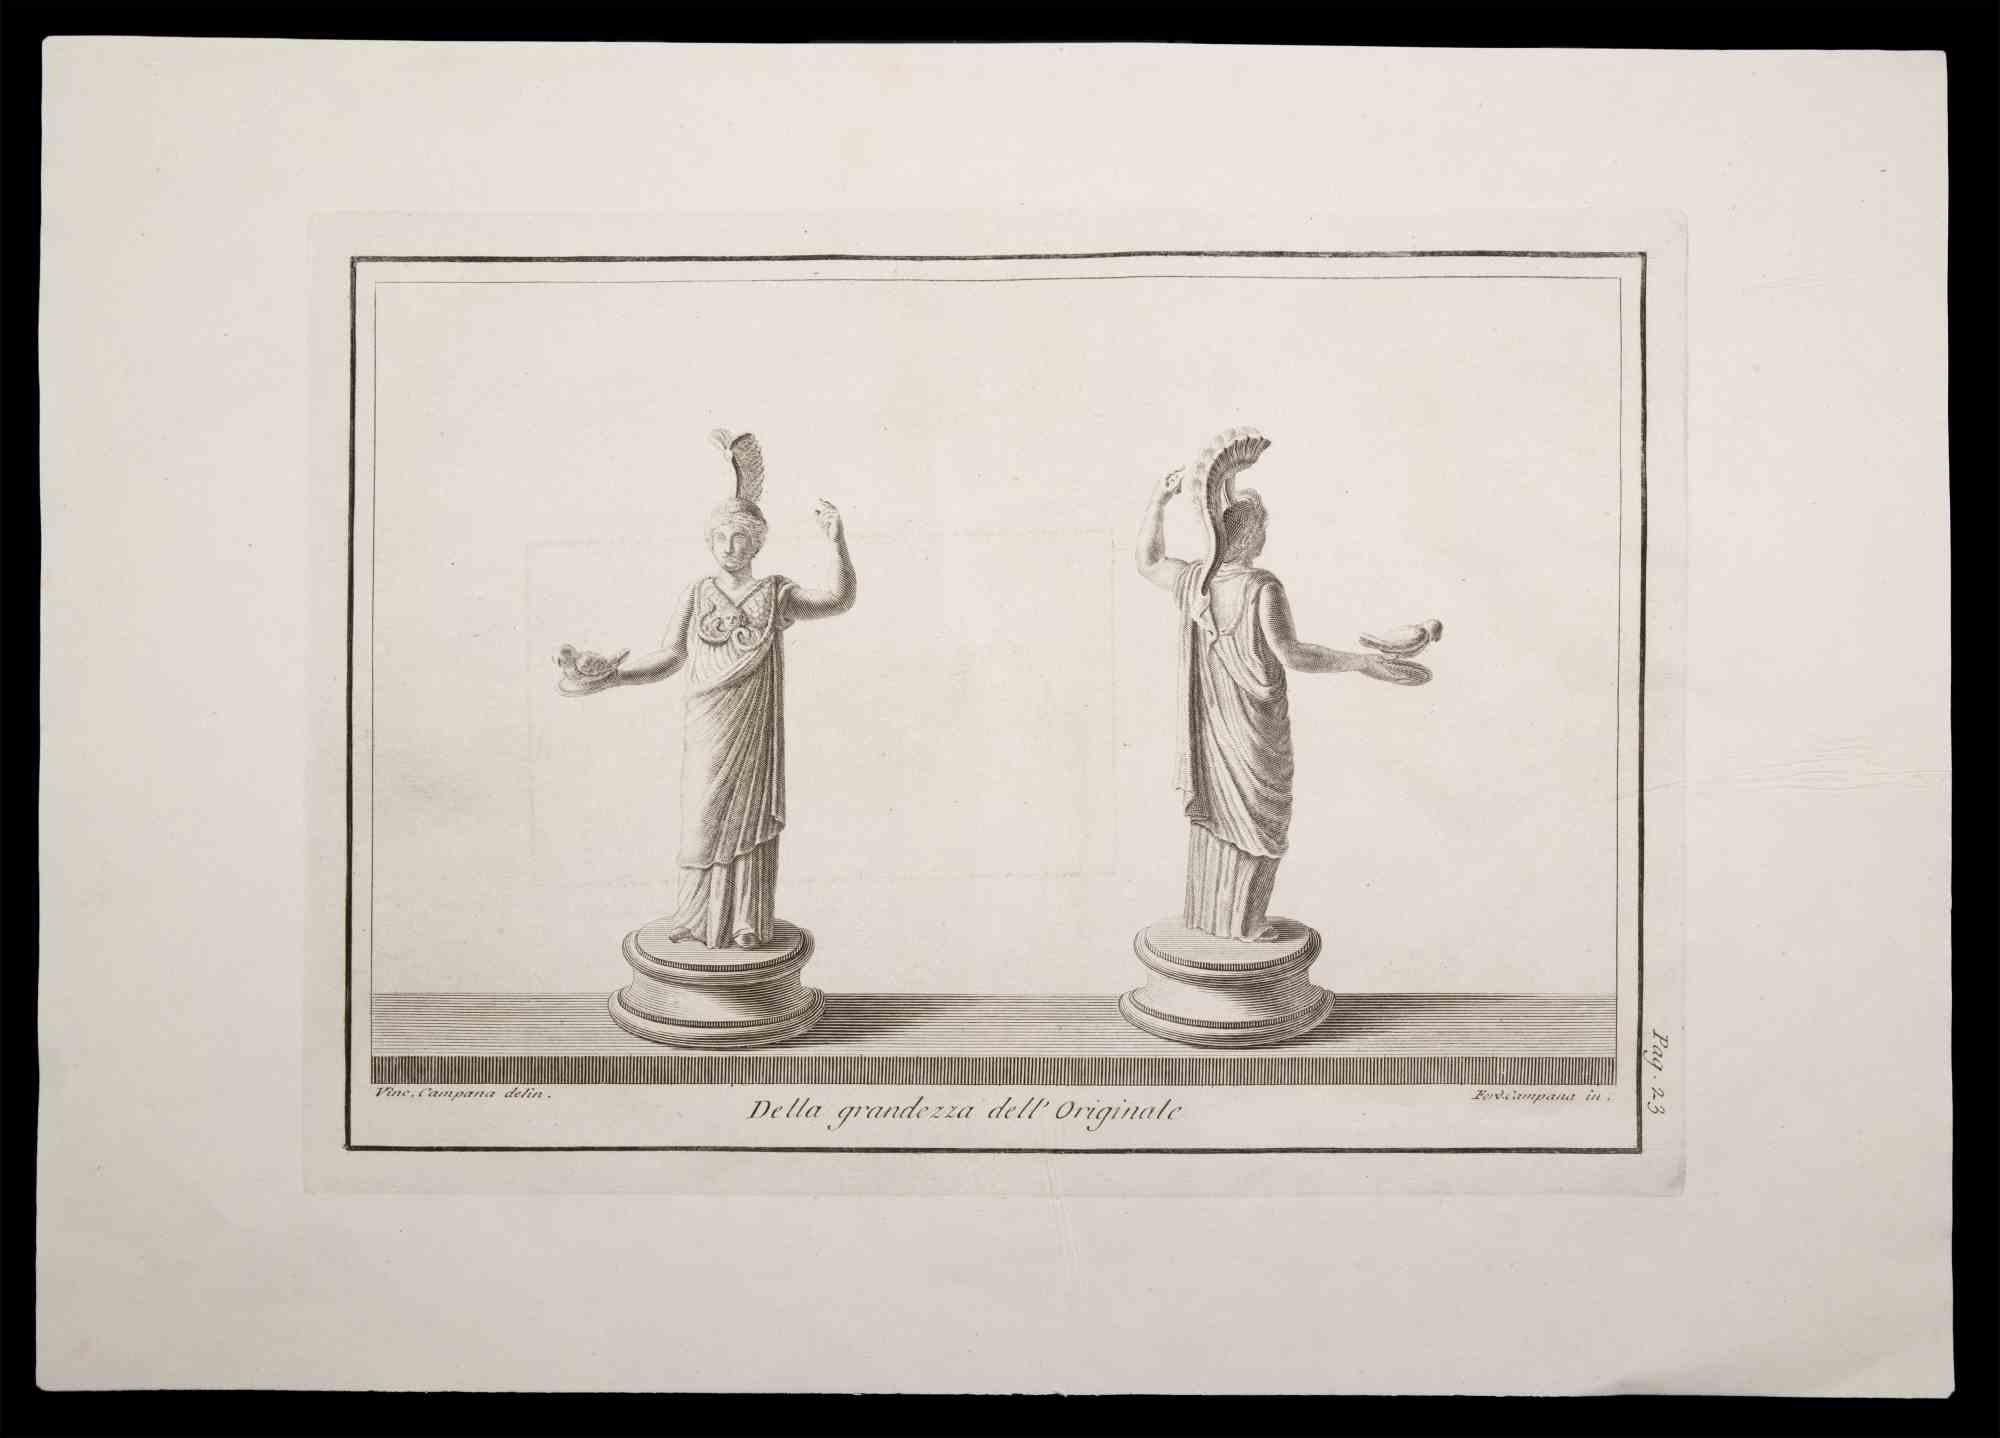 Ancient Roman Statue, from the series "Antiquities of Herculaneum", is an original etching on paper realized by Ferdinando Campana in the 18th century.

Signed on the plate, on the lower right.

Good conditions with some folding.

The etching